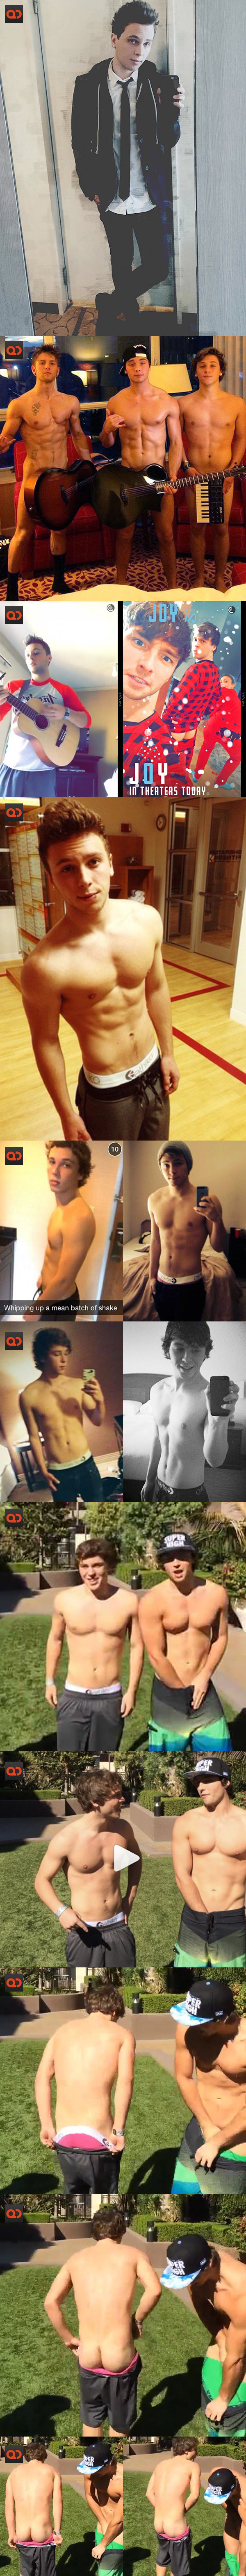 Keaton Stromberg, From Pop Band Emblem3, Allegedly Naked On Snapchat!